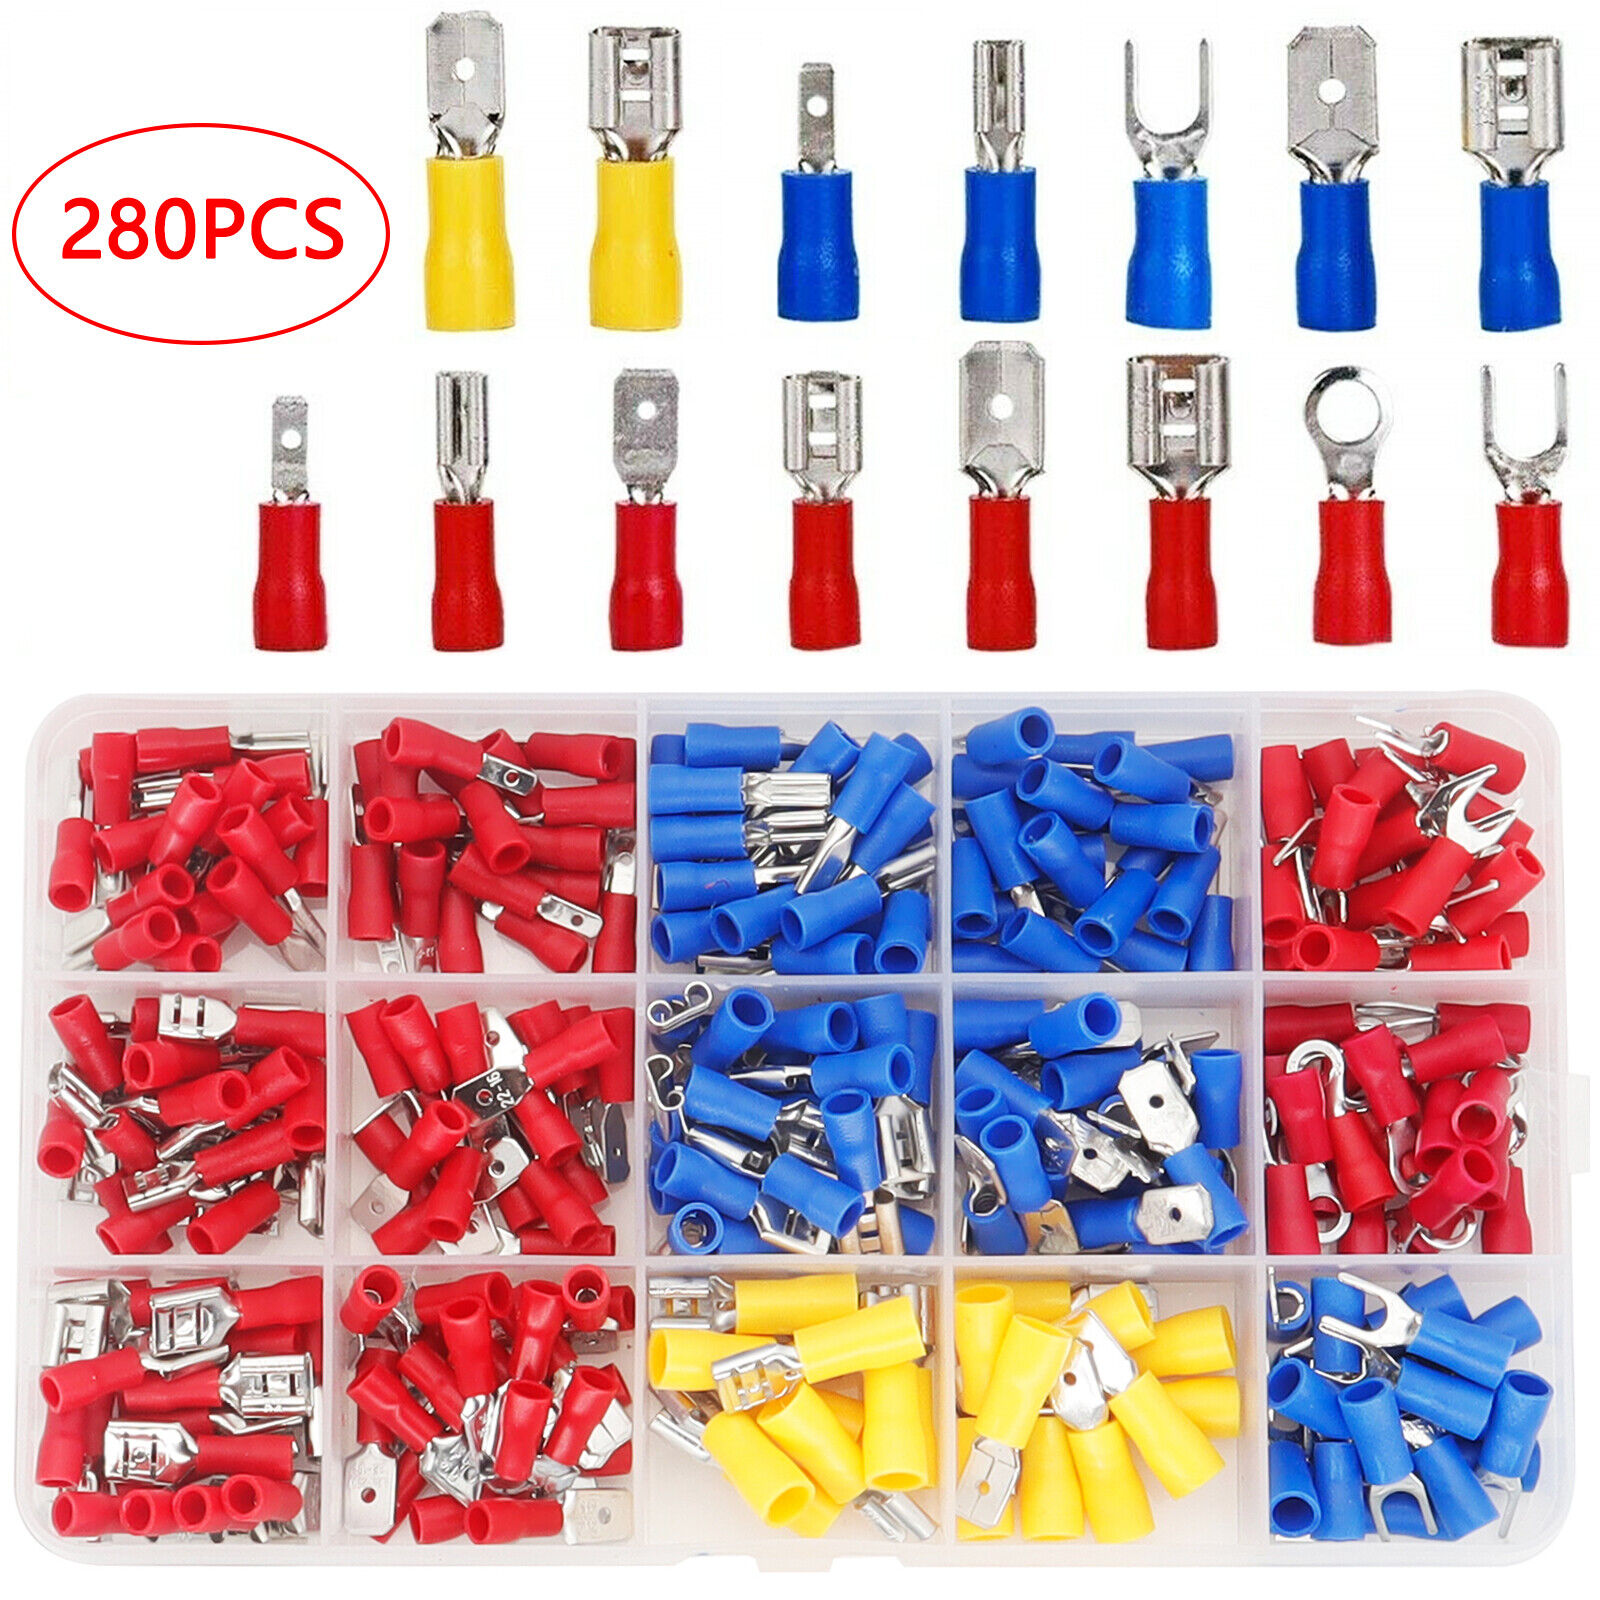 280Pcs-Car Wire Assorted Insulated Electrical Terminals Connectors Crimp Box Kit